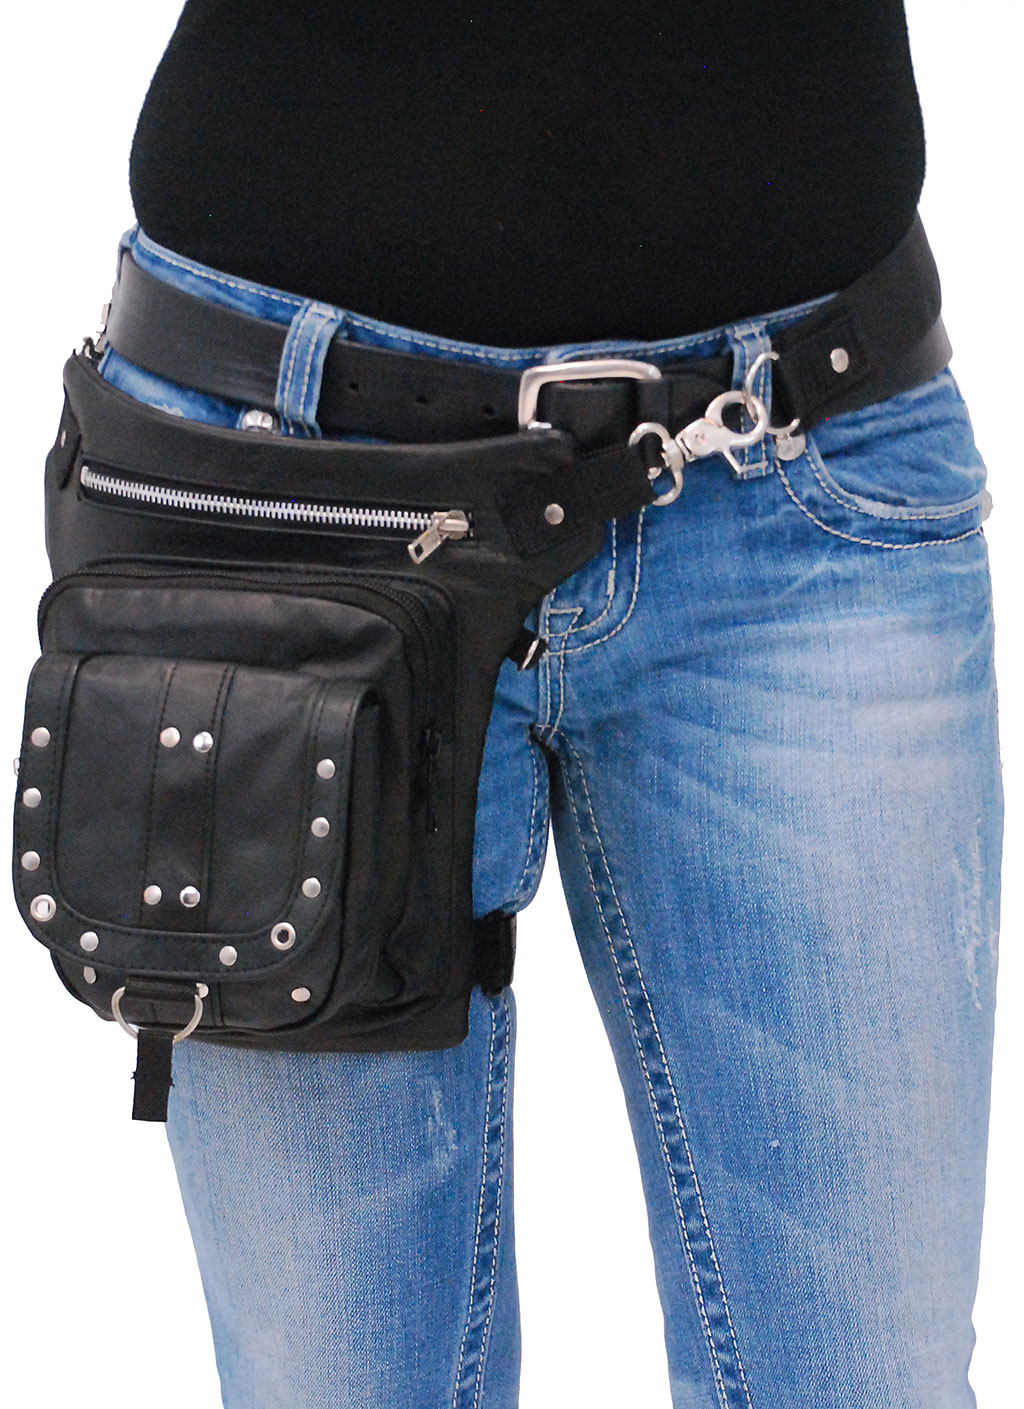 Studded Leather Thigh Bag w/Small Concealed Pocket #TB351SGRK - Jamin ...